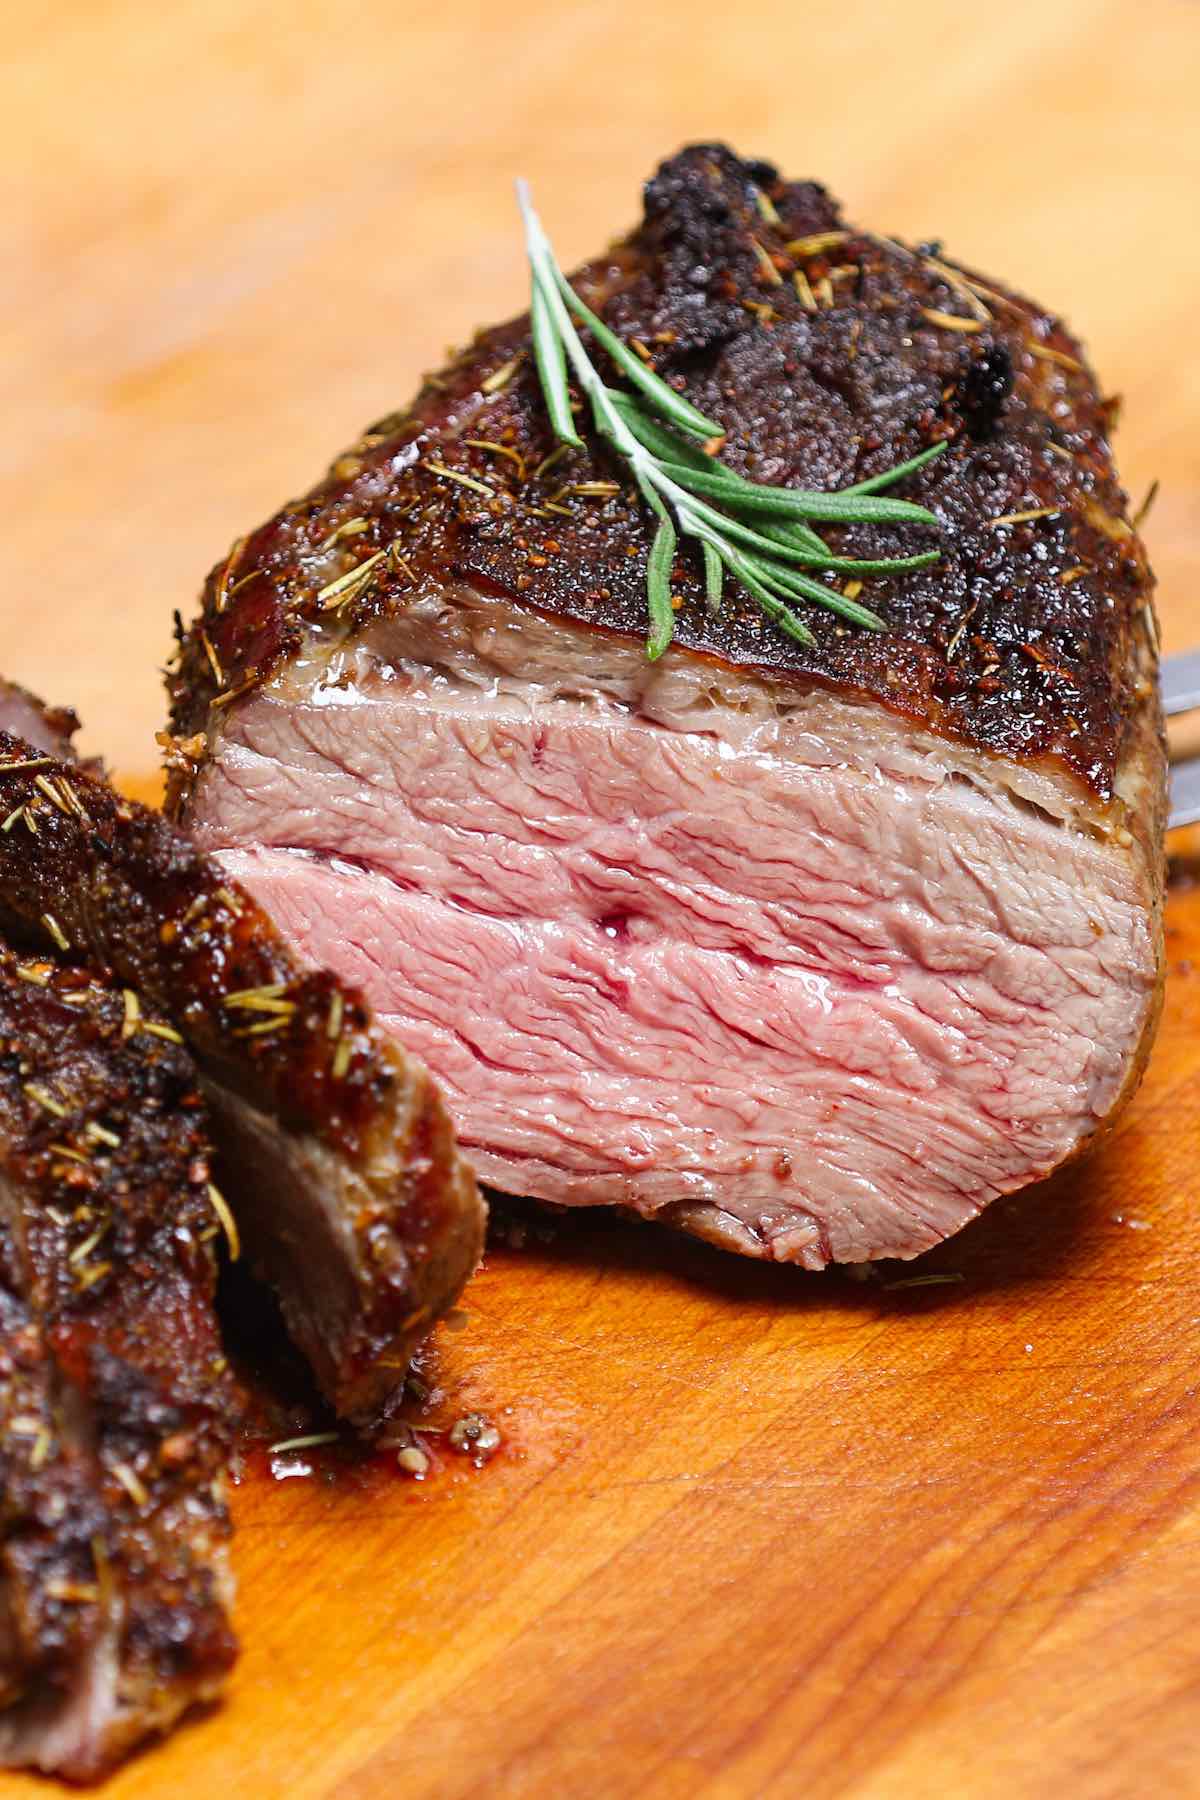 A juicy tri tip roast cooked to medium doneness in the oven